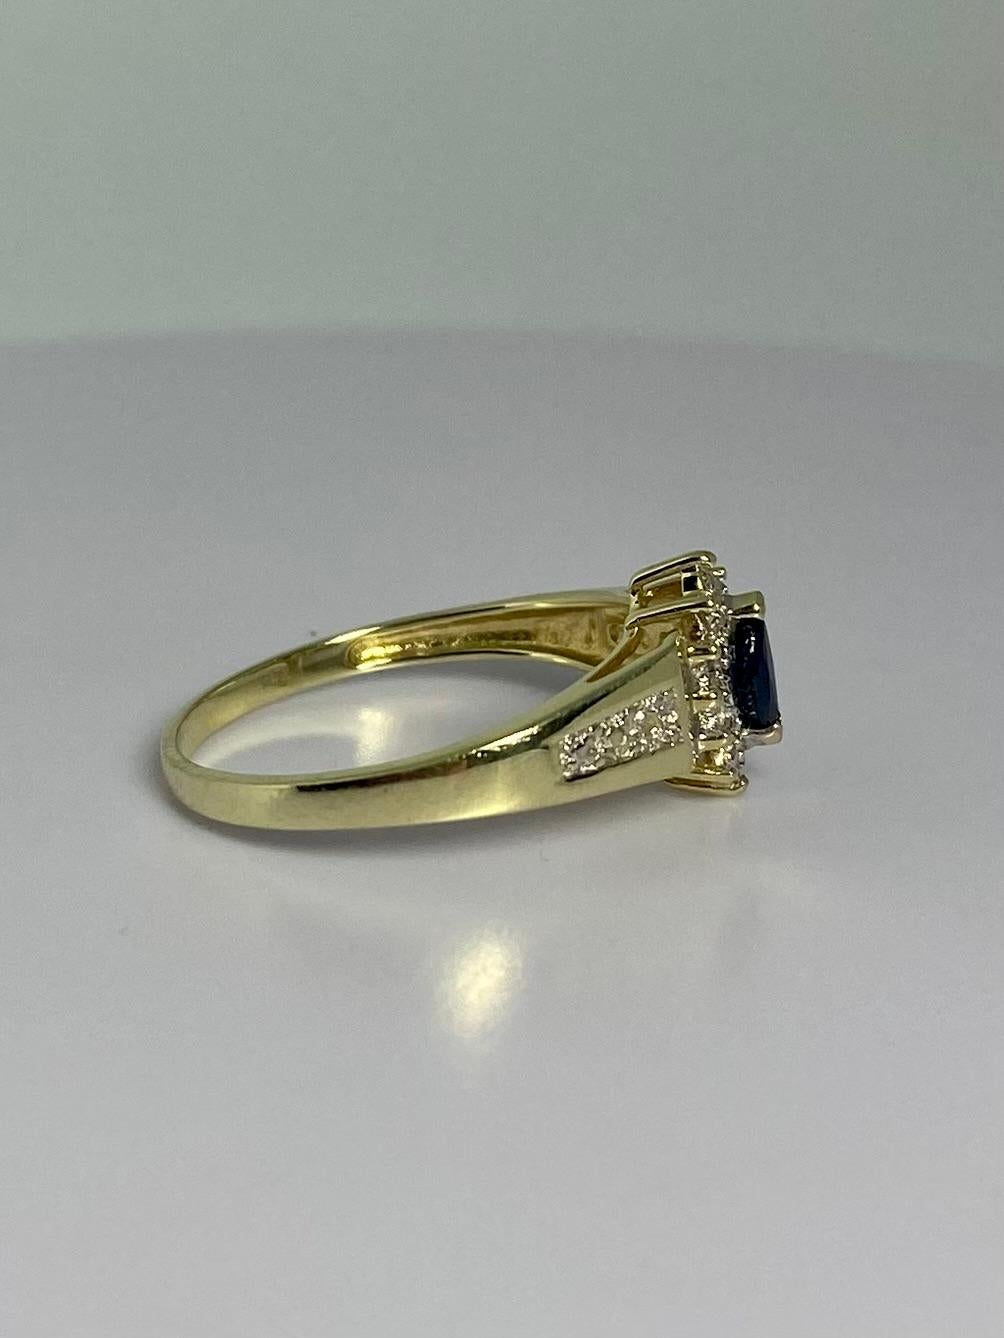 Elegant ring made of 14 ct yellow gold with oval blue sapphire&diamond stimulant In Good Condition For Sale In Heemstede, NL